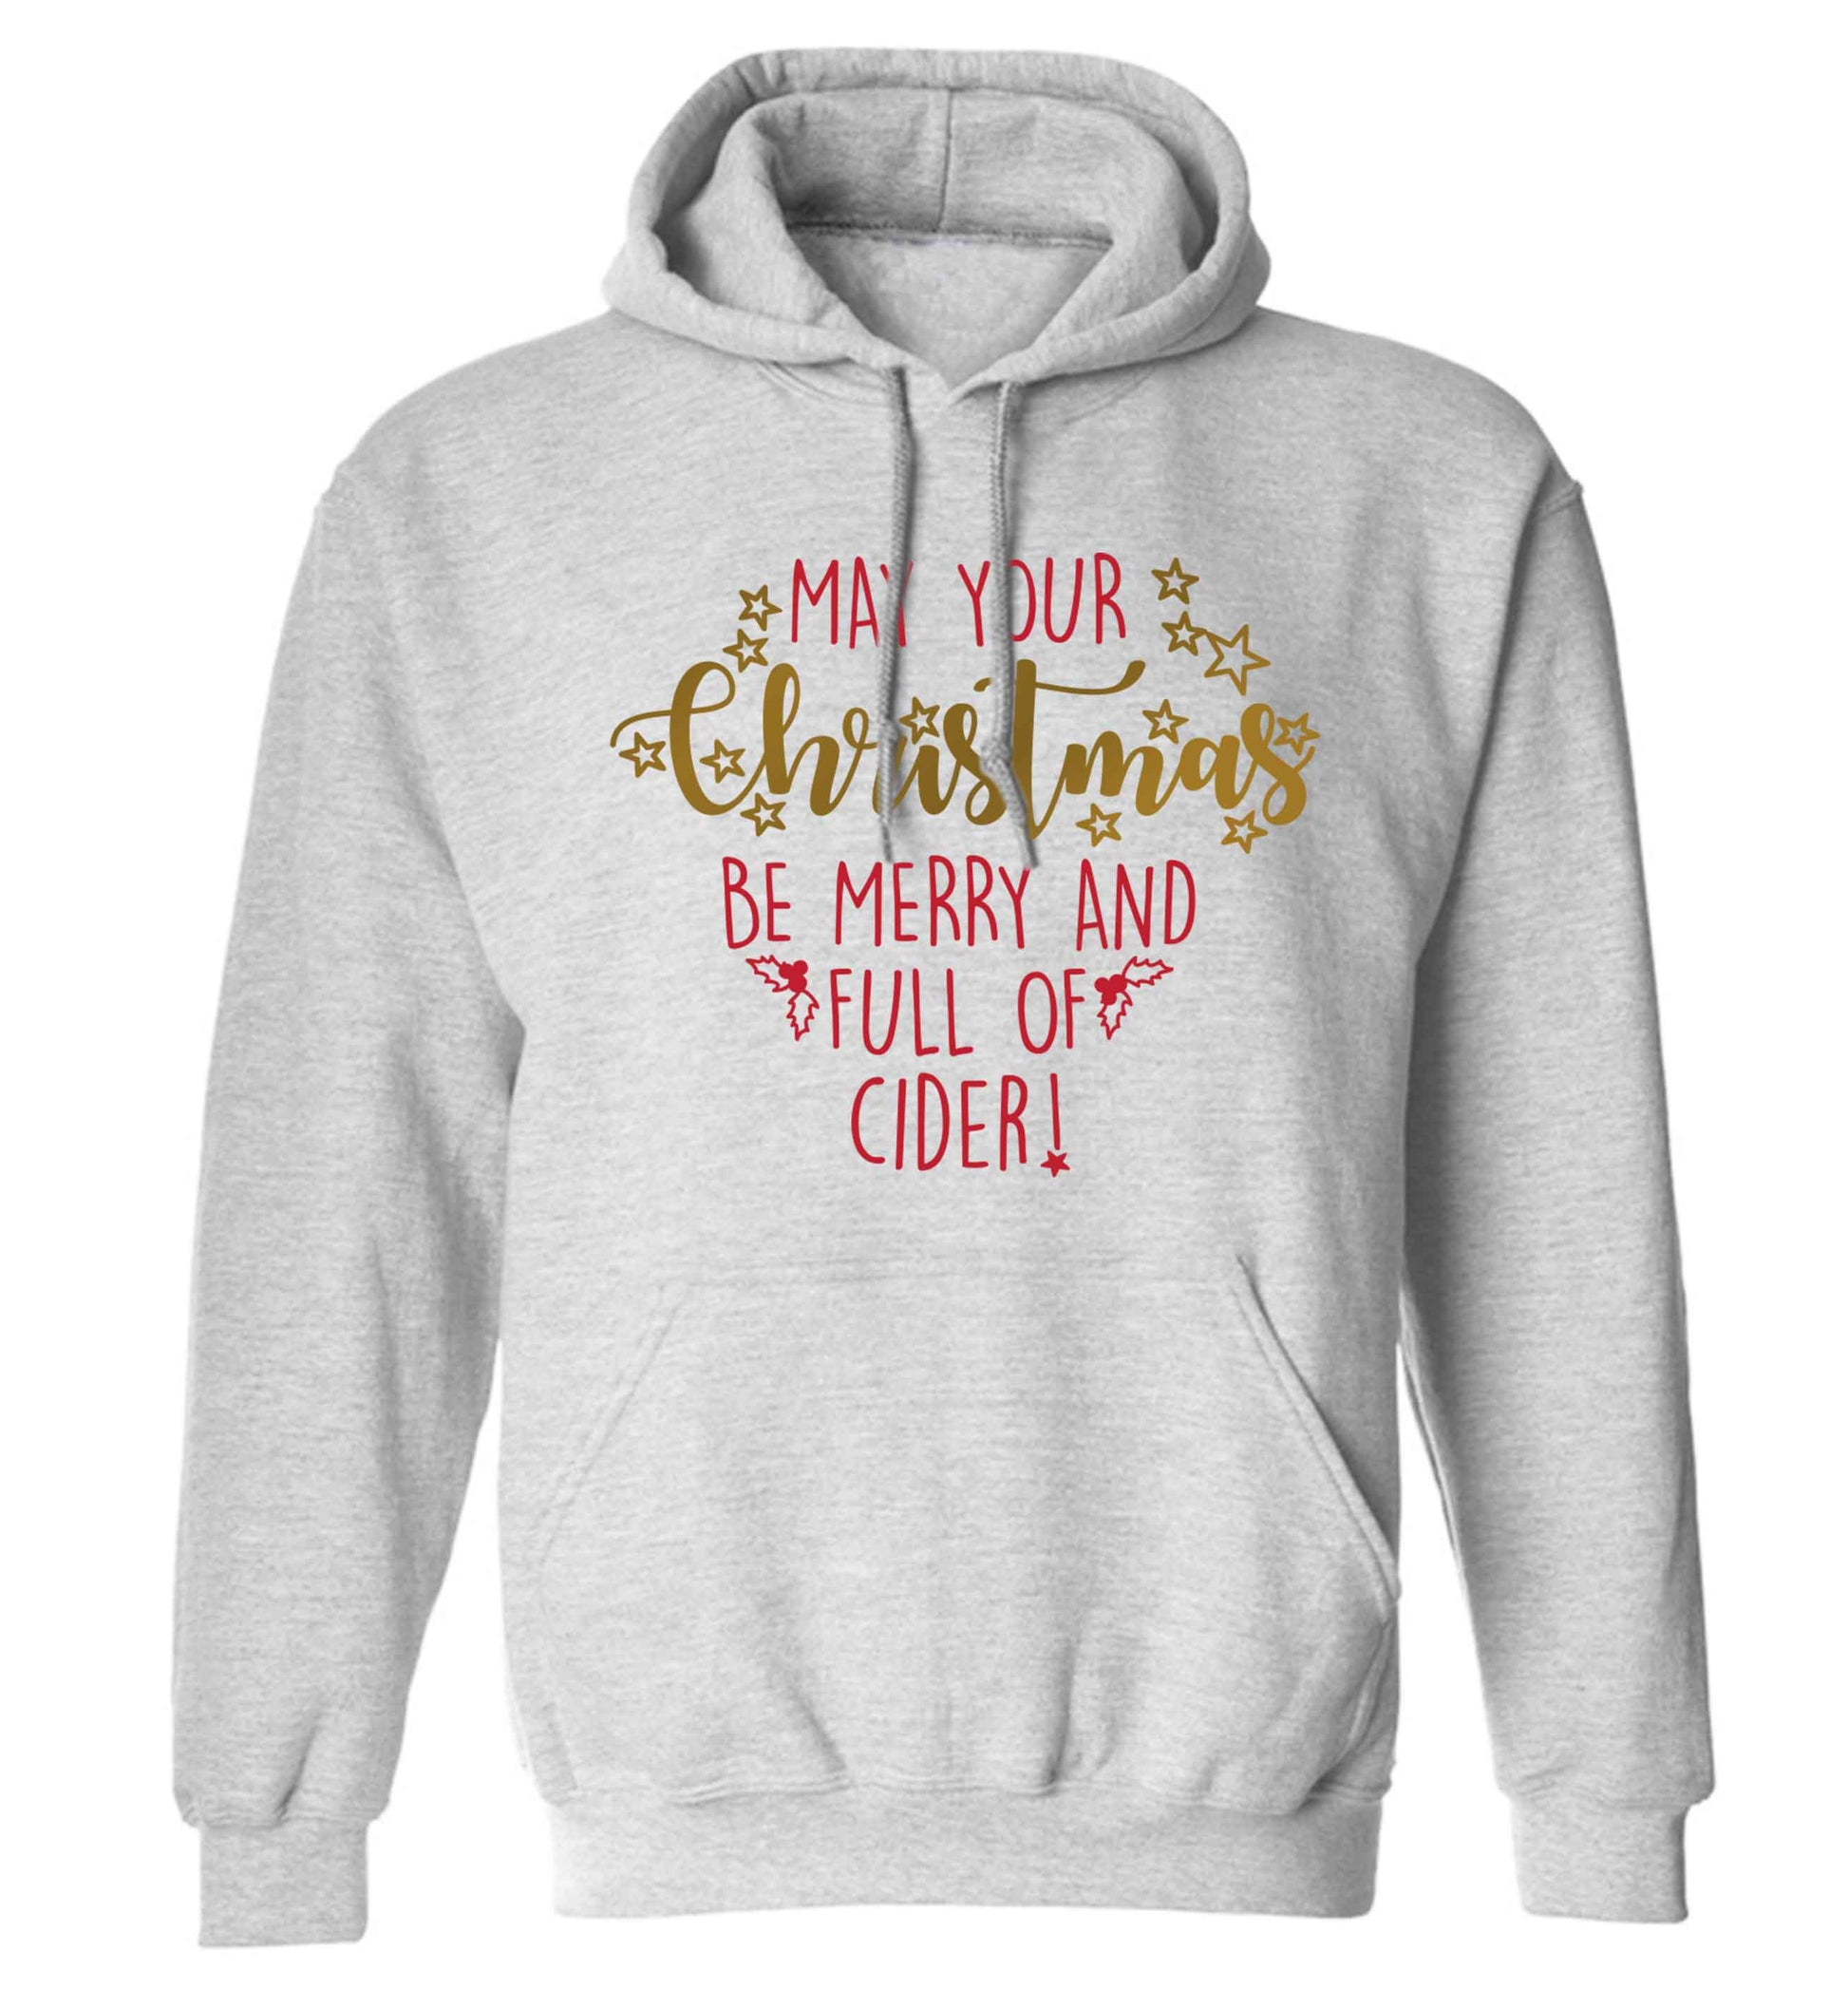 May your Christmas be merry and full of cider adults unisex grey hoodie 2XL